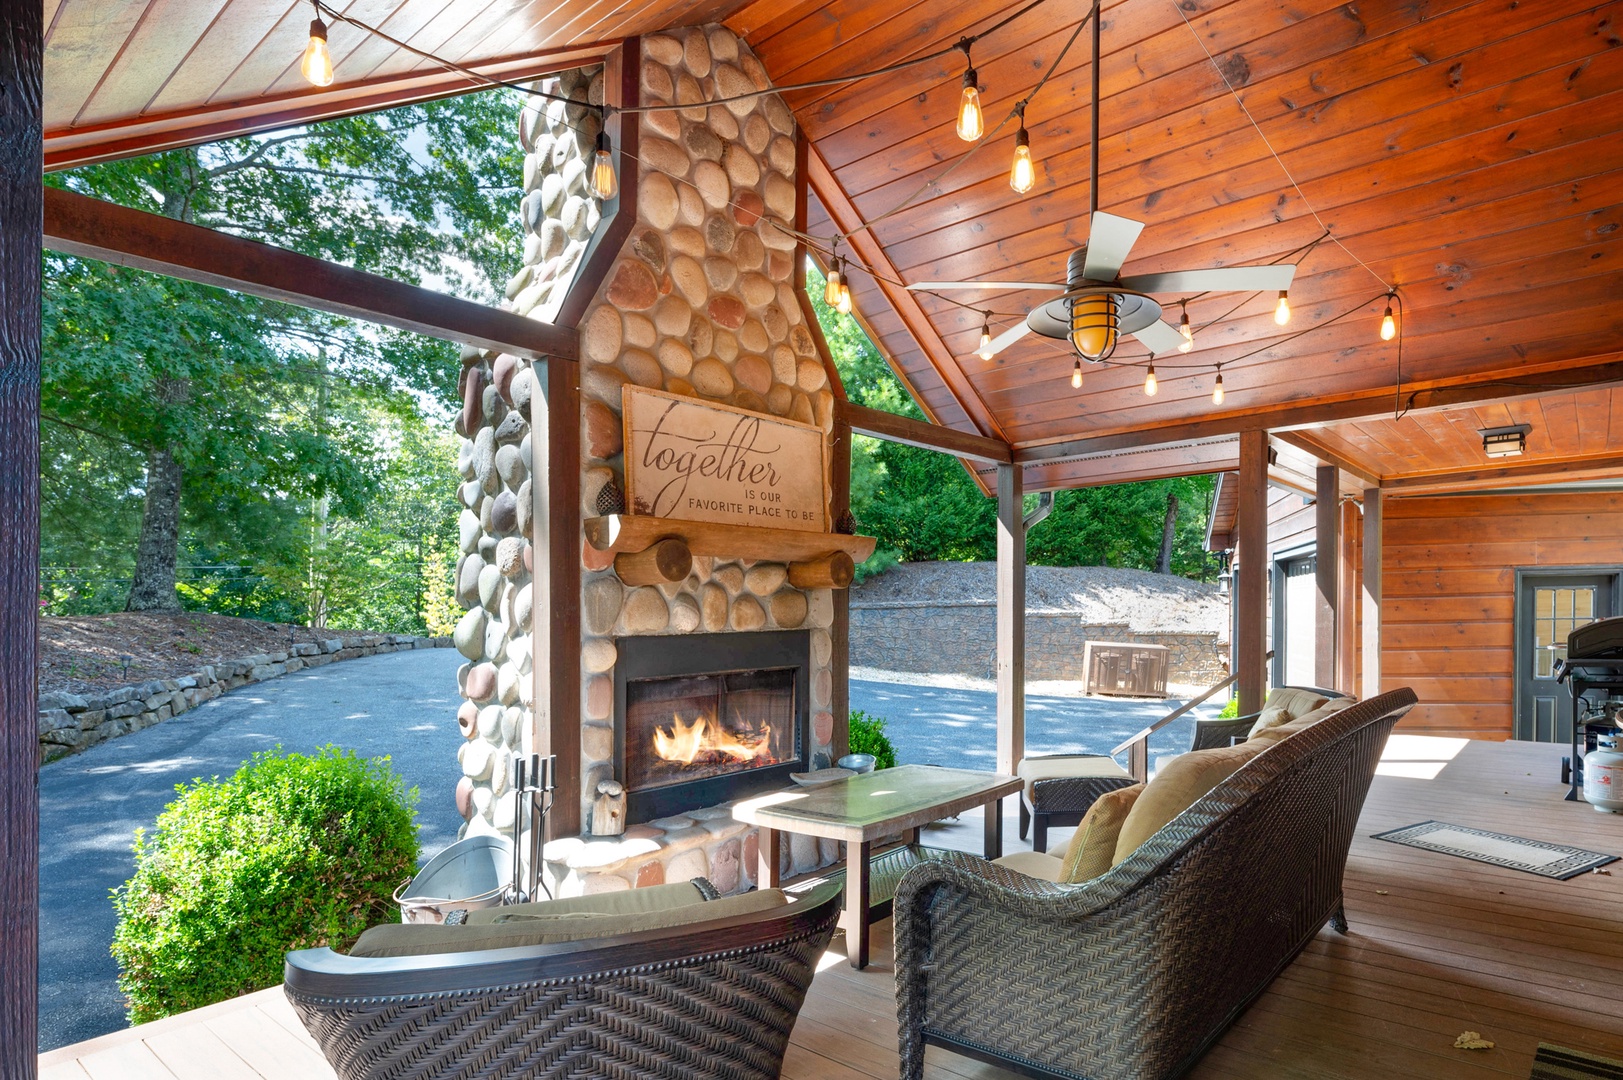 Kricket's Overlook- Outdoor fireplace and seating on the main level deck